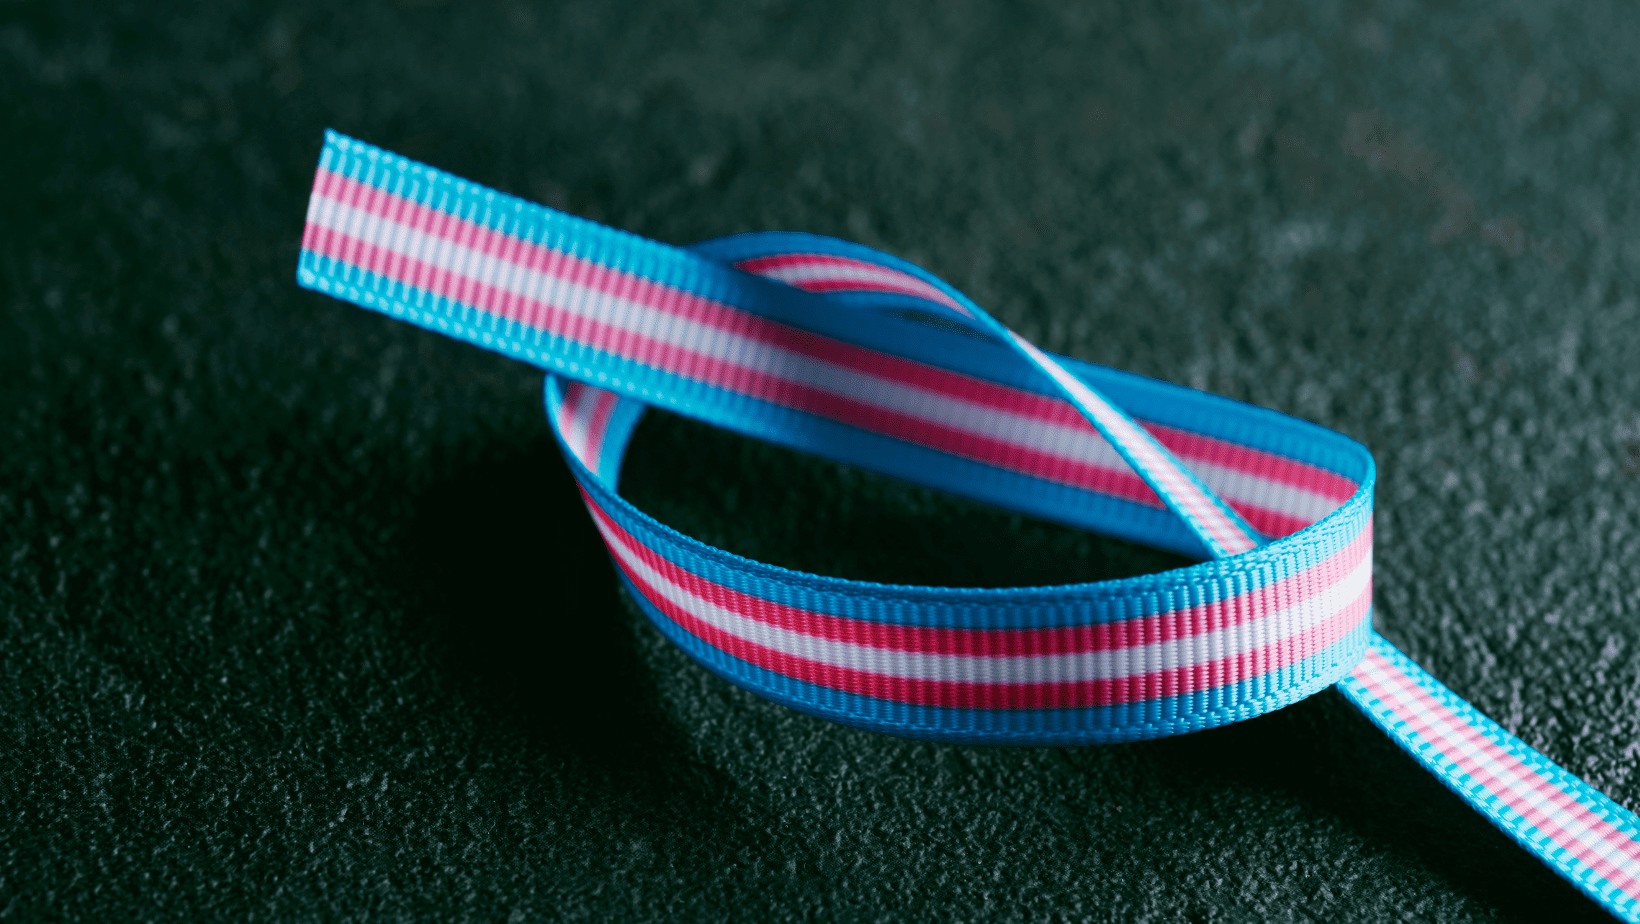 Ribbon striped with trans pride colors tied in a loose knot on black background